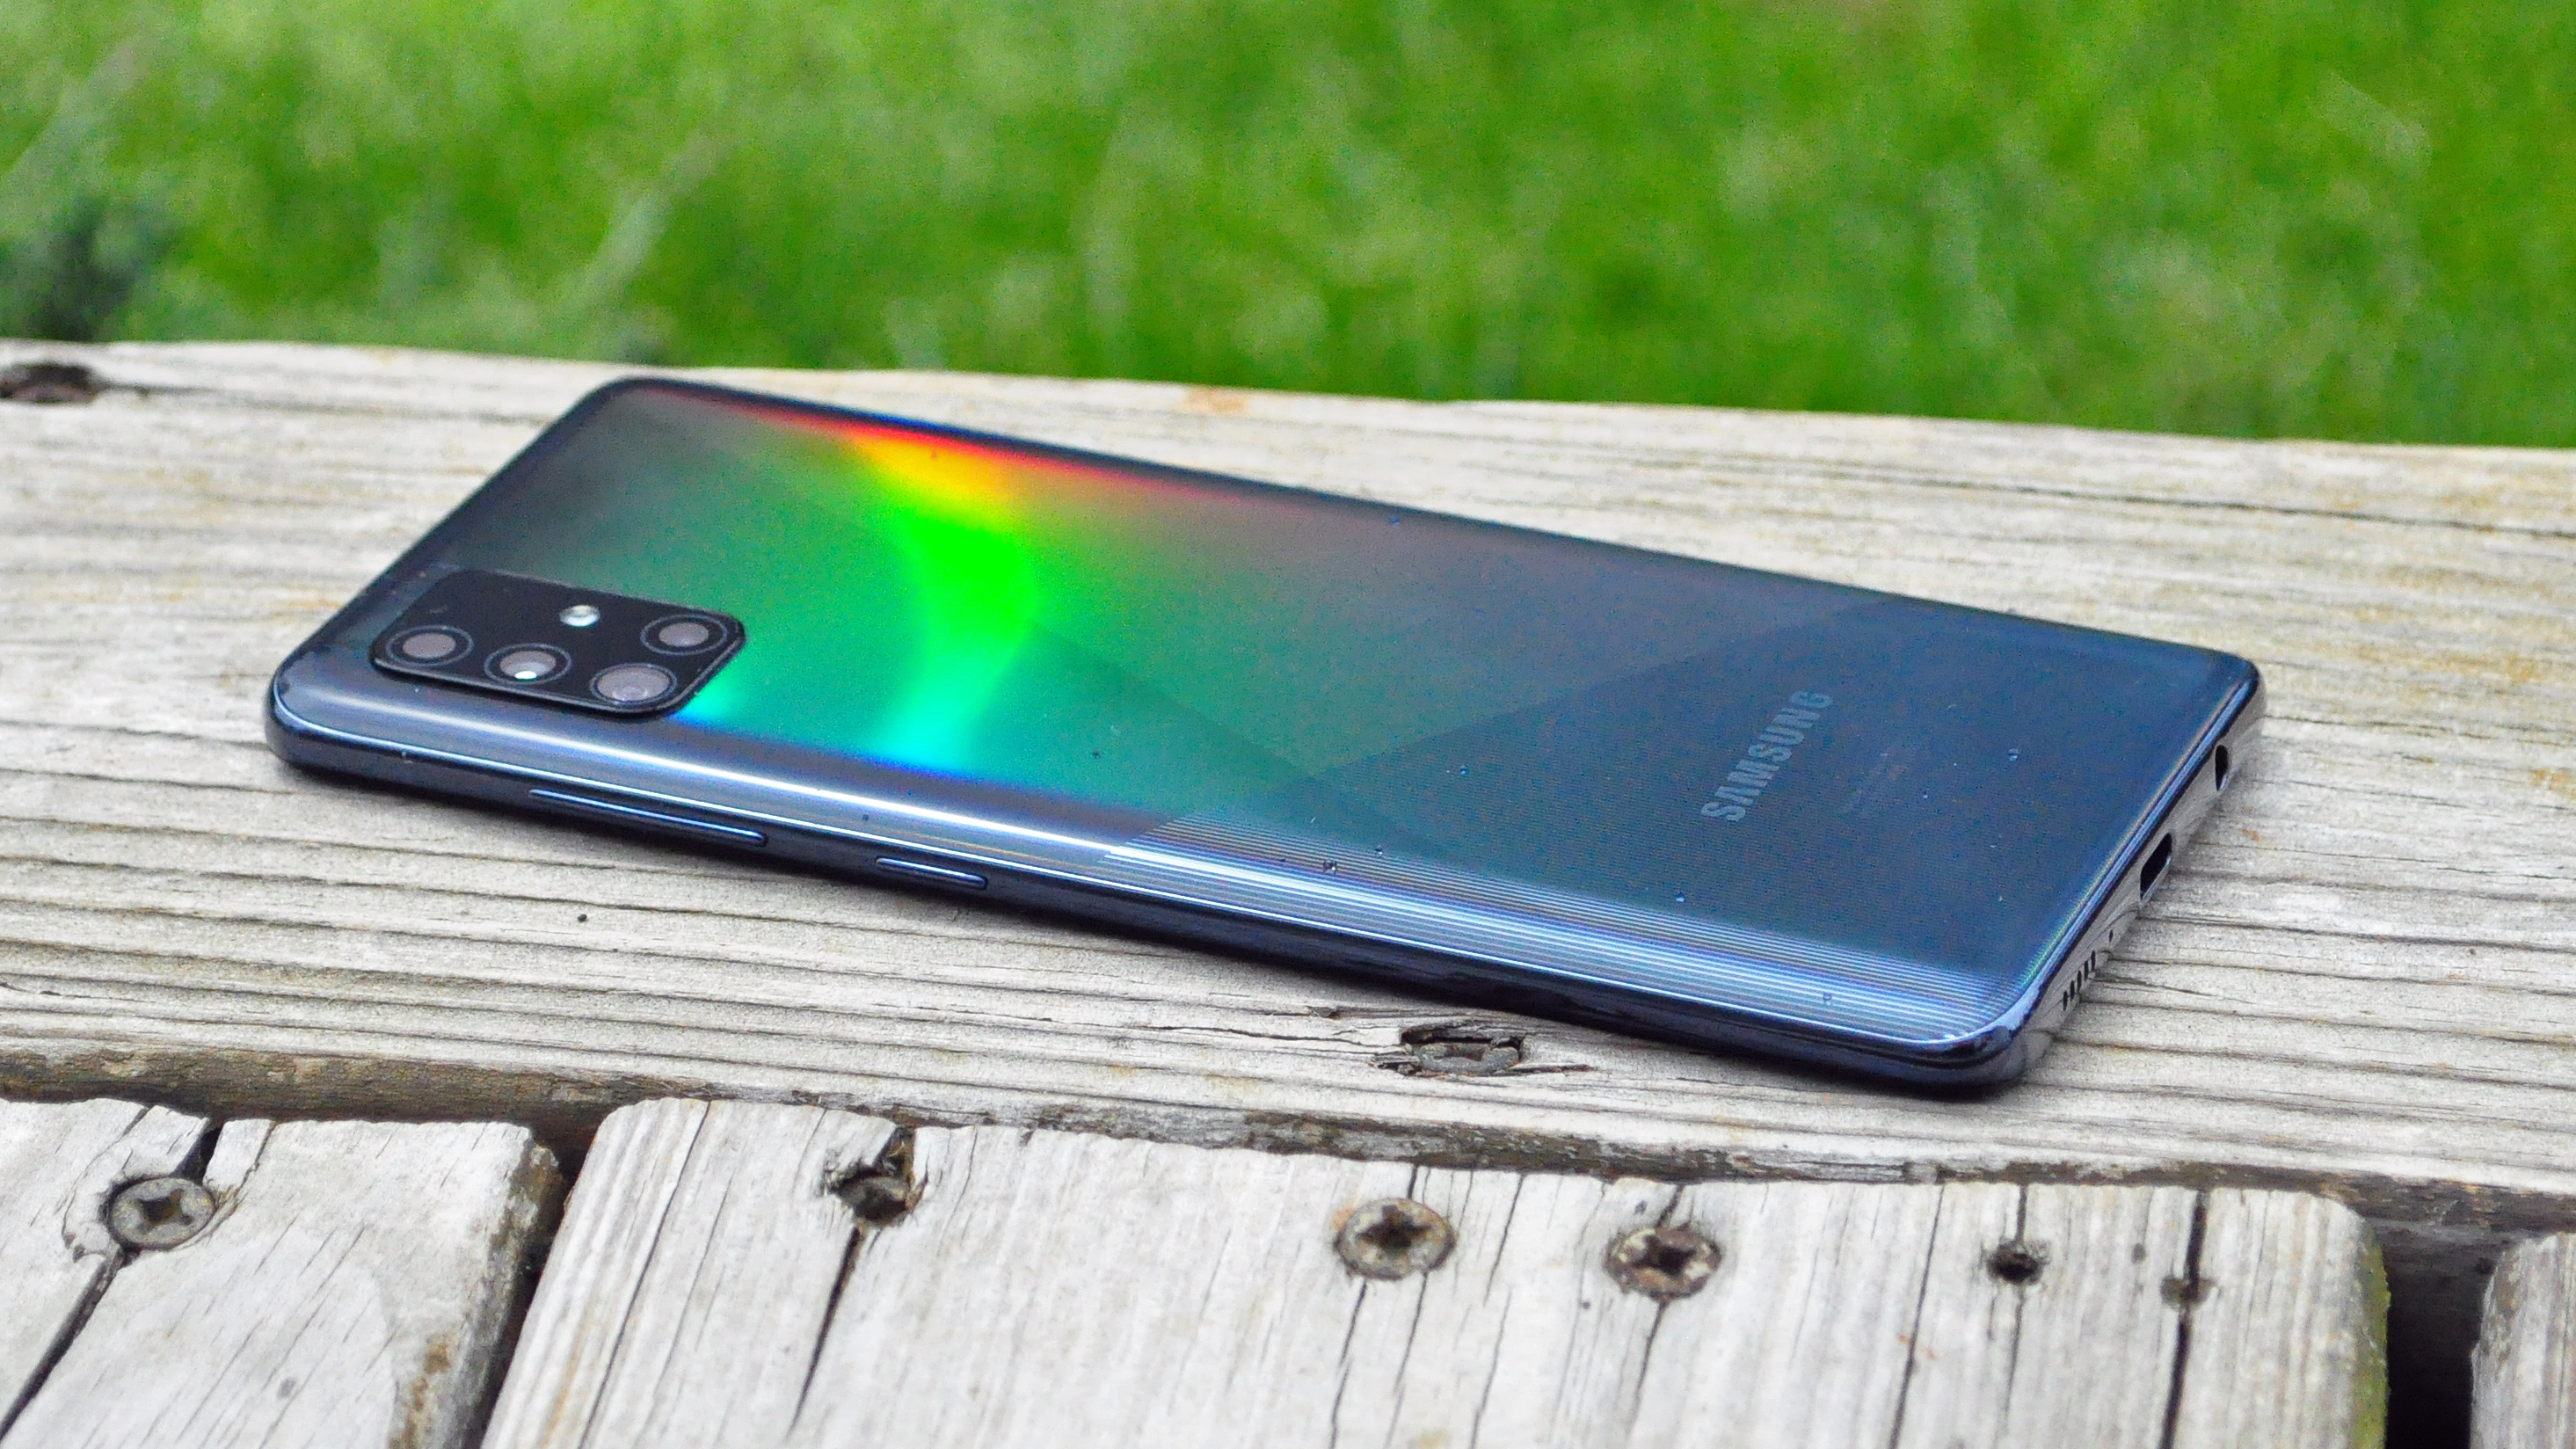 Samsung Galaxy A51, hands on: Solid mid-range specs and performance